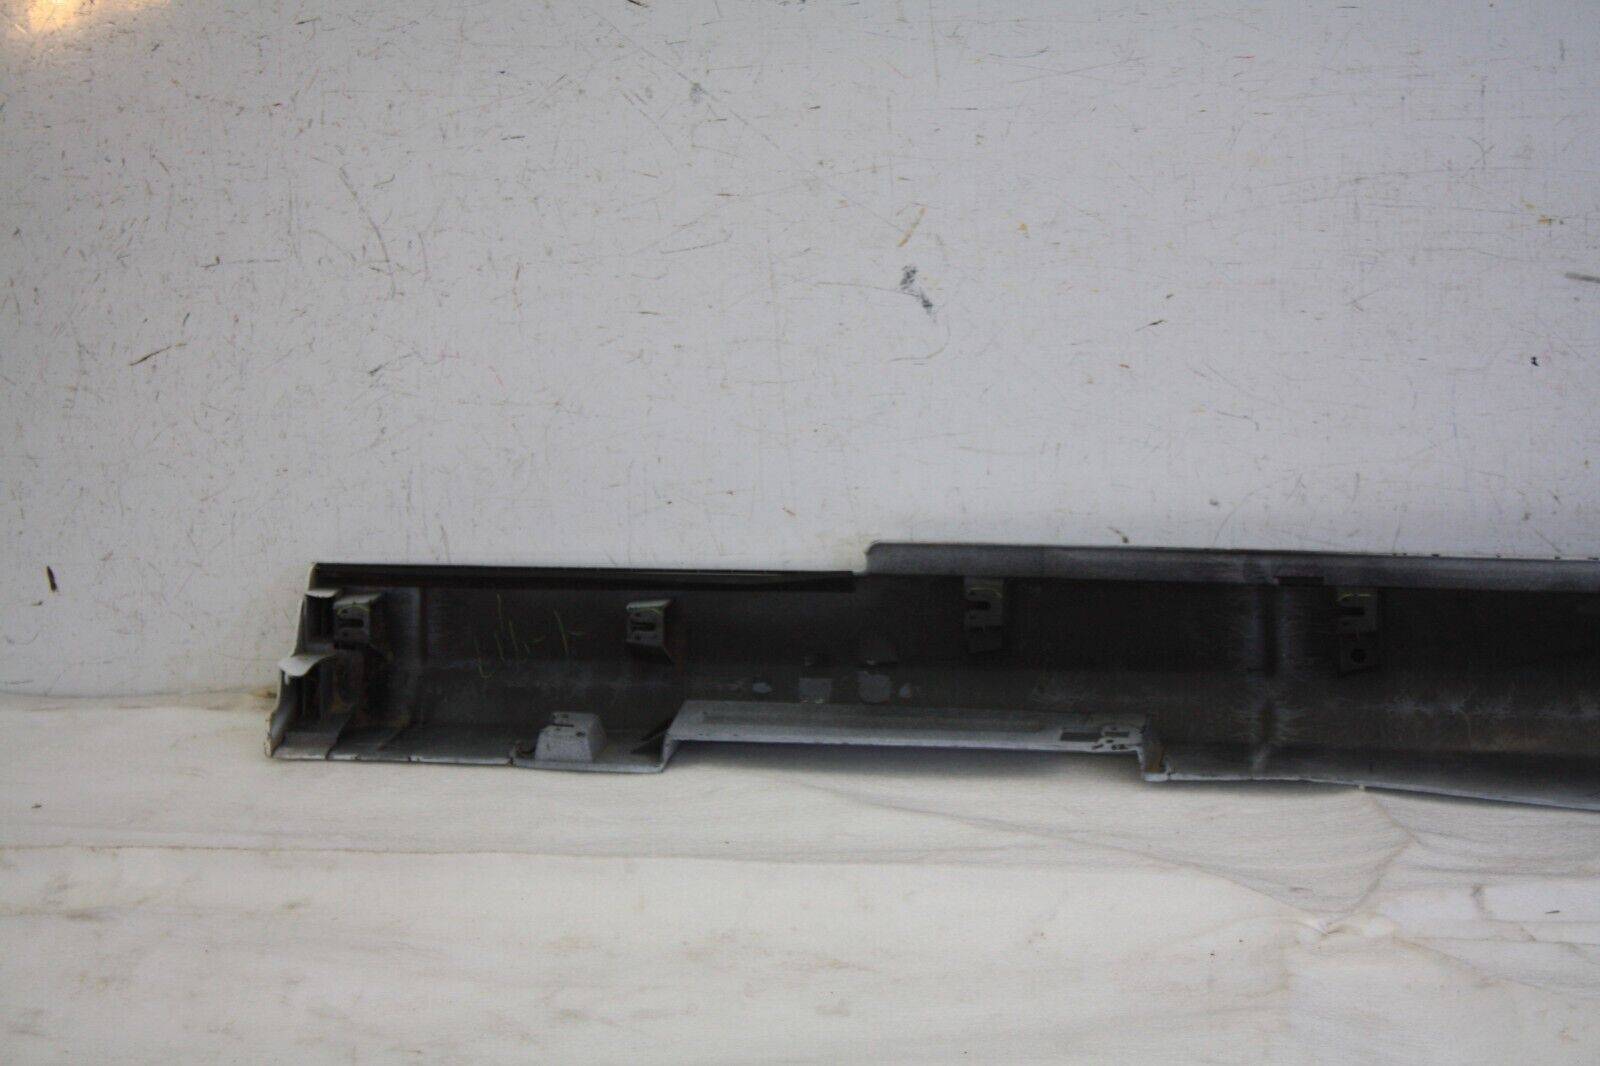 Mazda-MX-5-Right-Side-Skirt-2013-TO-2015-NH52-51P40-Genuine-176211517307-18